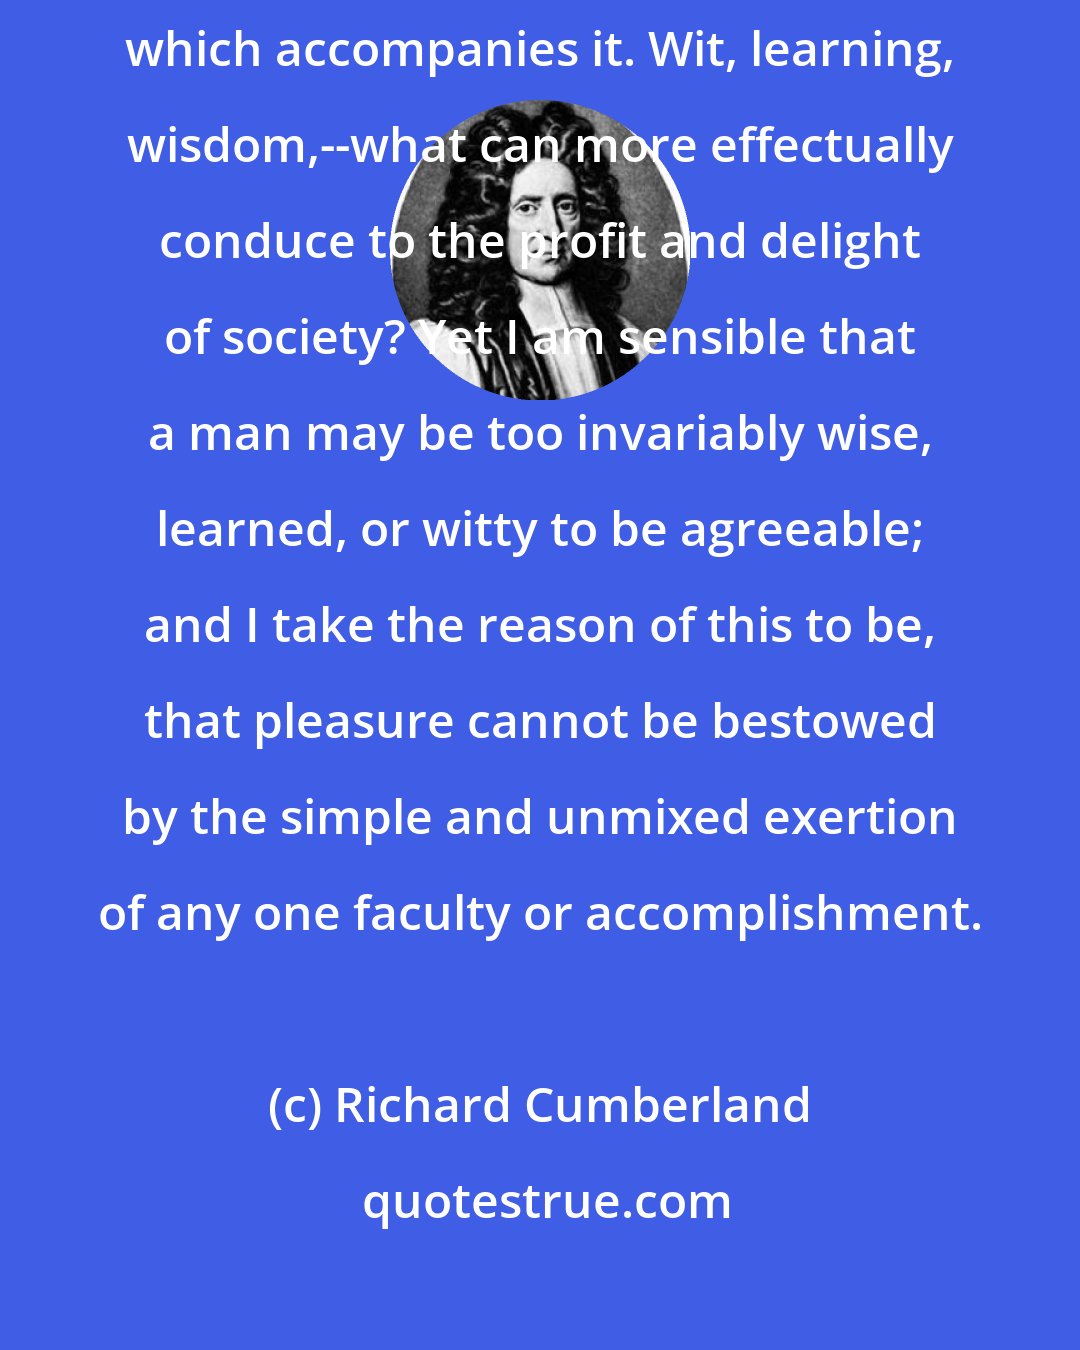 Richard Cumberland: The art of being agreeable frequently miscarries through the ambition which accompanies it. Wit, learning, wisdom,--what can more effectually conduce to the profit and delight of society? Yet I am sensible that a man may be too invariably wise, learned, or witty to be agreeable; and I take the reason of this to be, that pleasure cannot be bestowed by the simple and unmixed exertion of any one faculty or accomplishment.